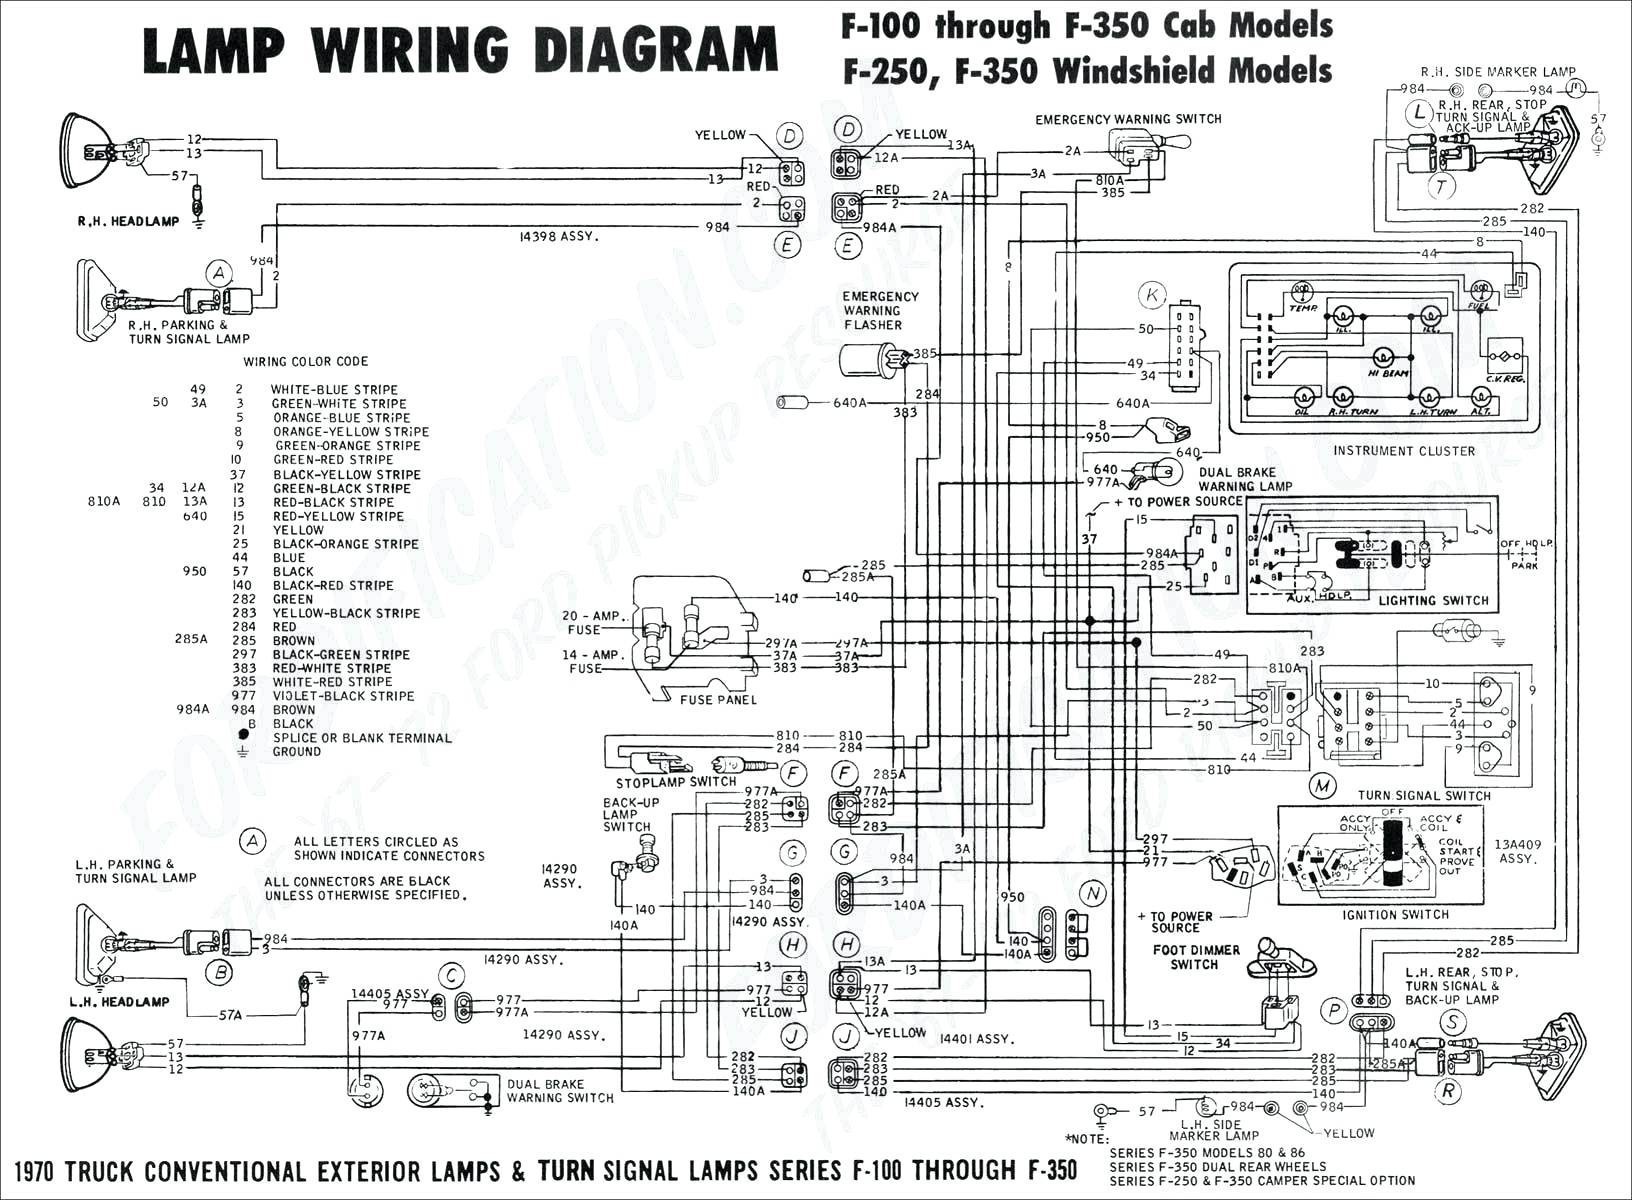 Wiring Diagram for Bulkhead Lights 2019 2005 Chevy Silverado Tail Light Wiring Diagram Unique Lovely Trailer